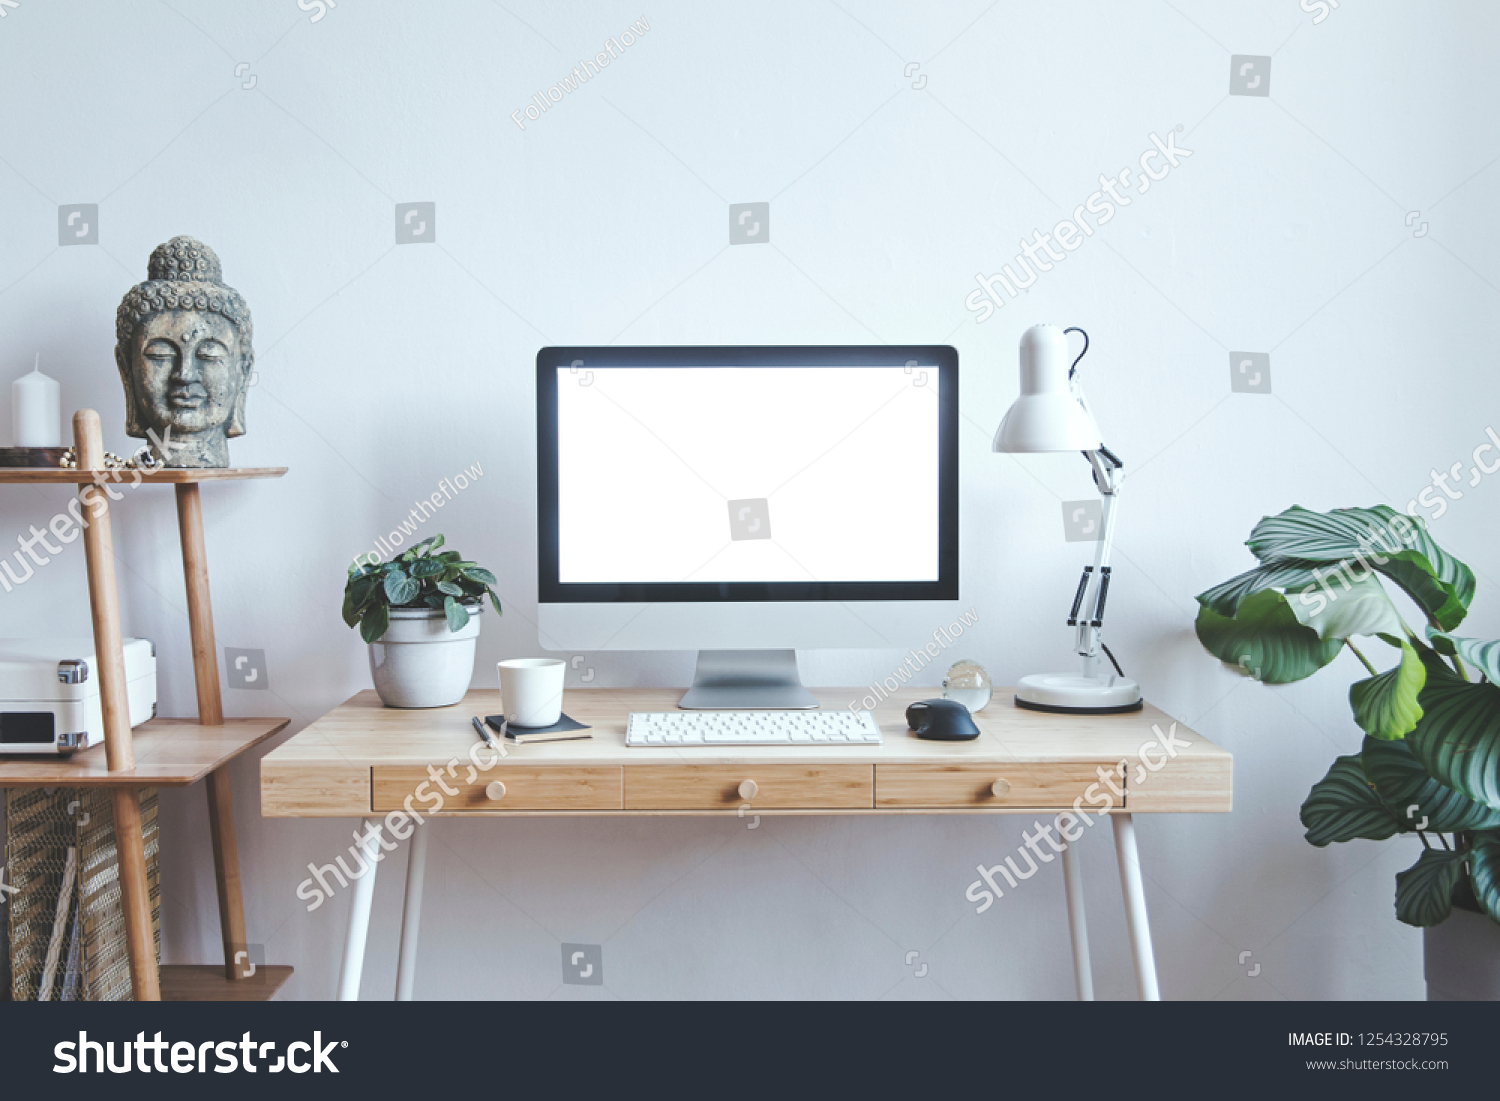 Stock Photo Stylish Scandinavian Interior Of Home Creative Desk With Mock Up Computer Screen Plants Bookstand 1254328795 